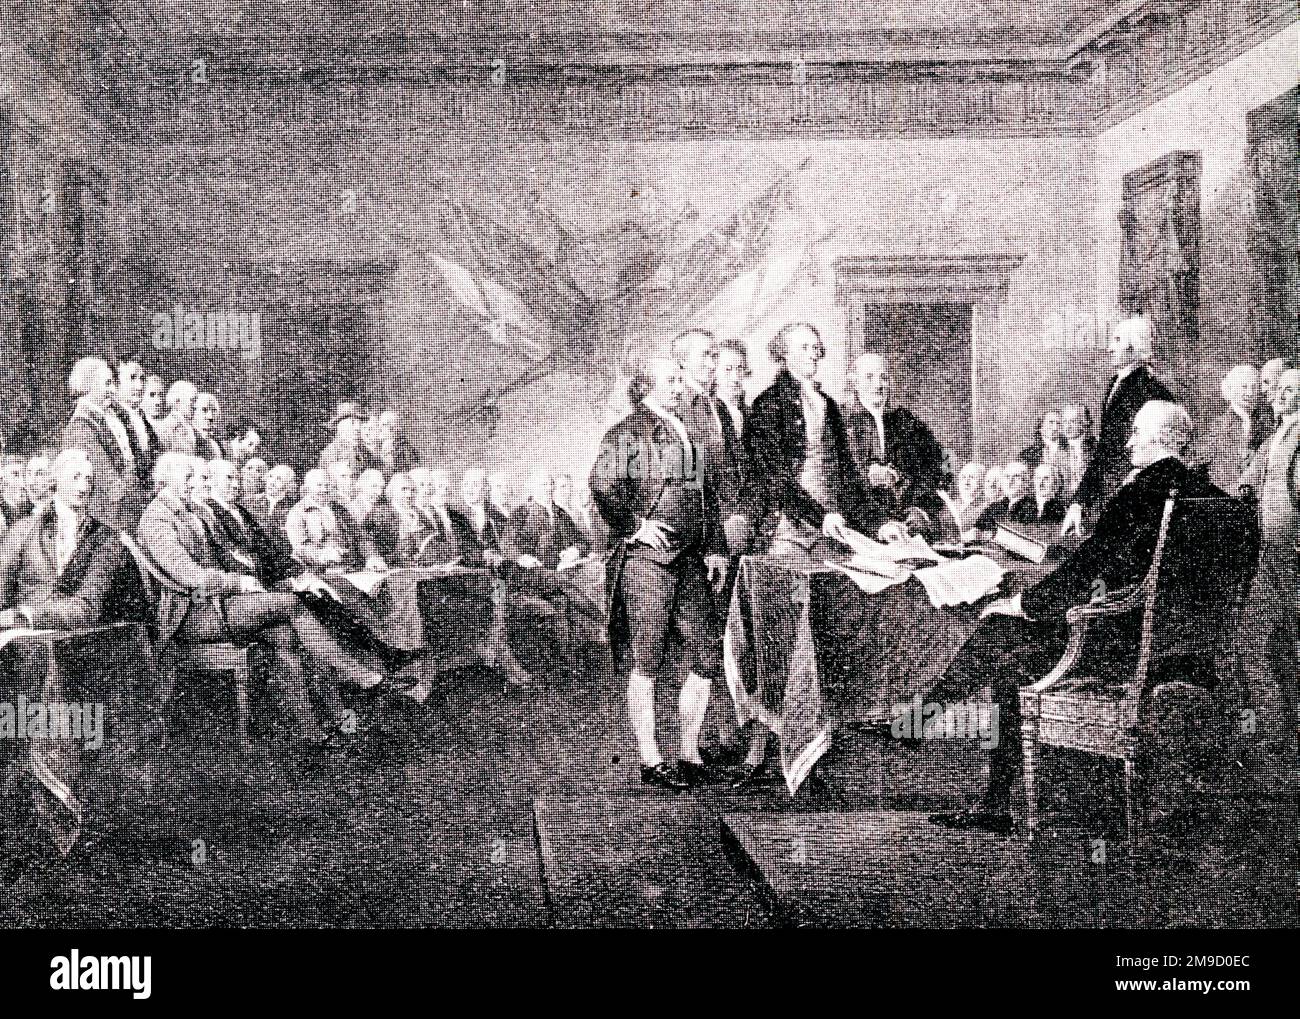 Declaration Of Independence Of Us - 4 July 1776 Stock Photo